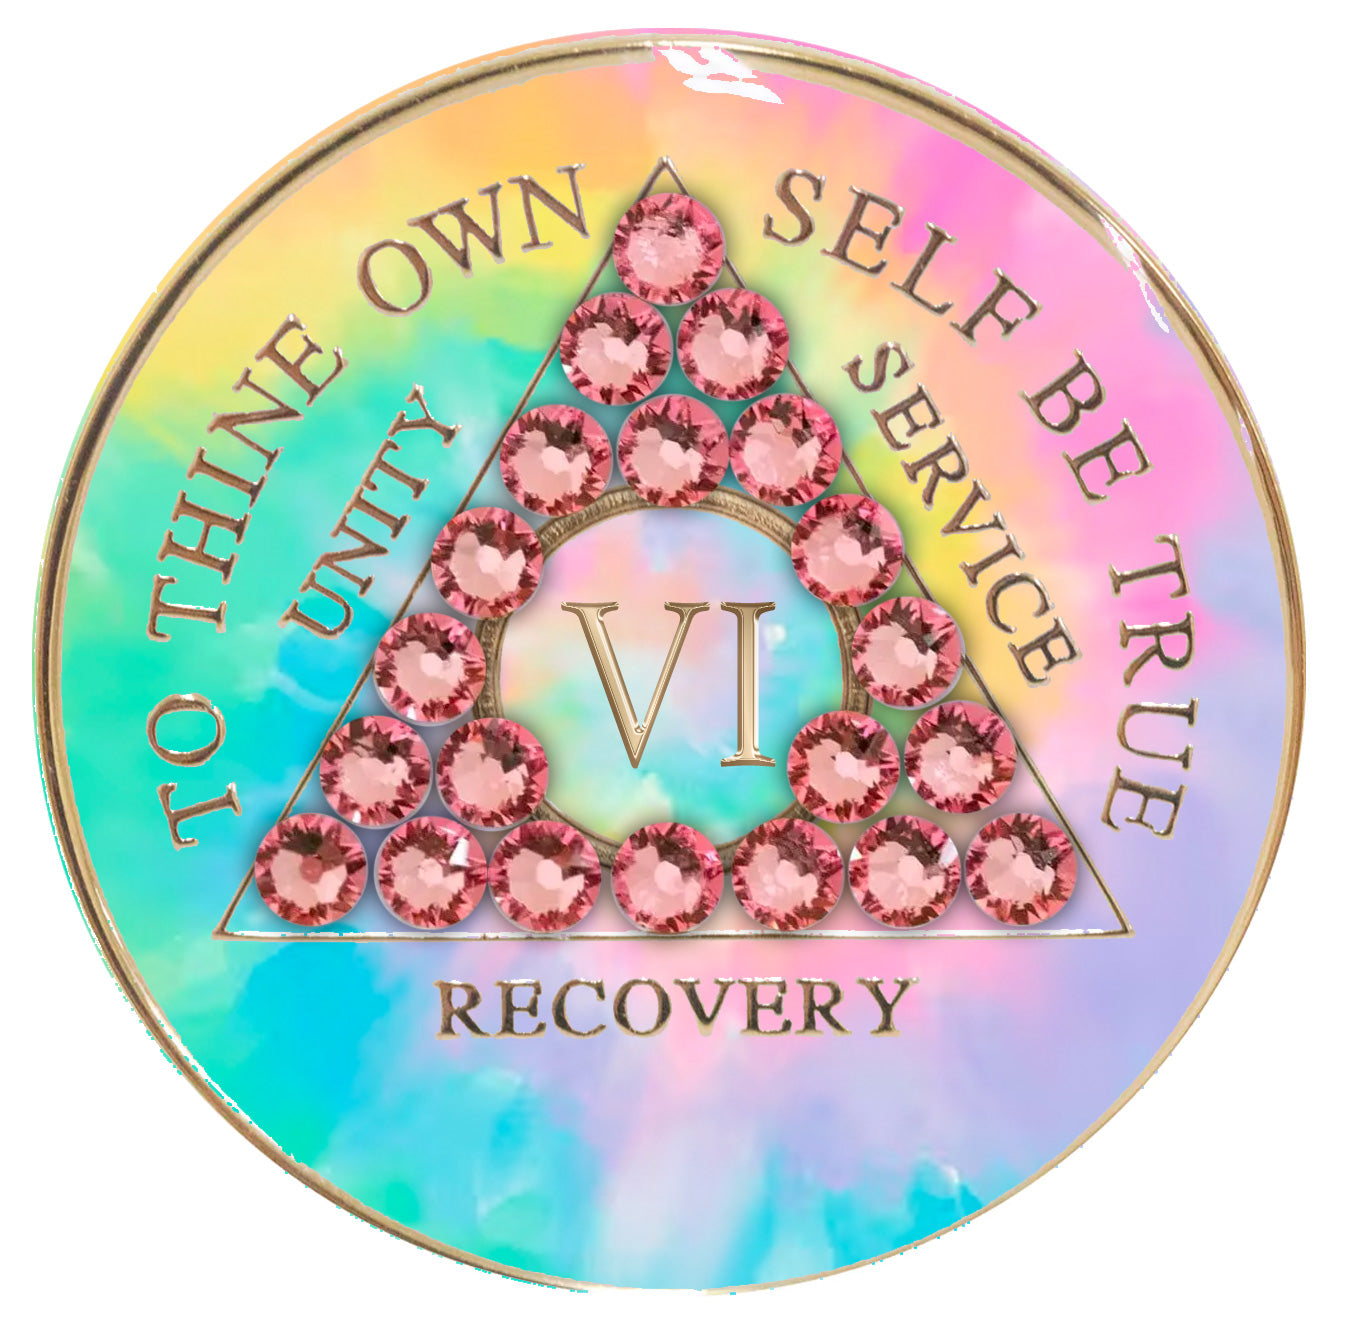 6 year AA medallion pastel tie-dye representing a psychic change that is needed in the recovery journey, with twenty-one light rose genuine crystals, pink, blue, yellow, and green, in the shape of the triangle, with the AA moto and roman numeral embossed in 14k gold-plated brass, the medallion is sealed with resin for a glossy, scratch free finish.